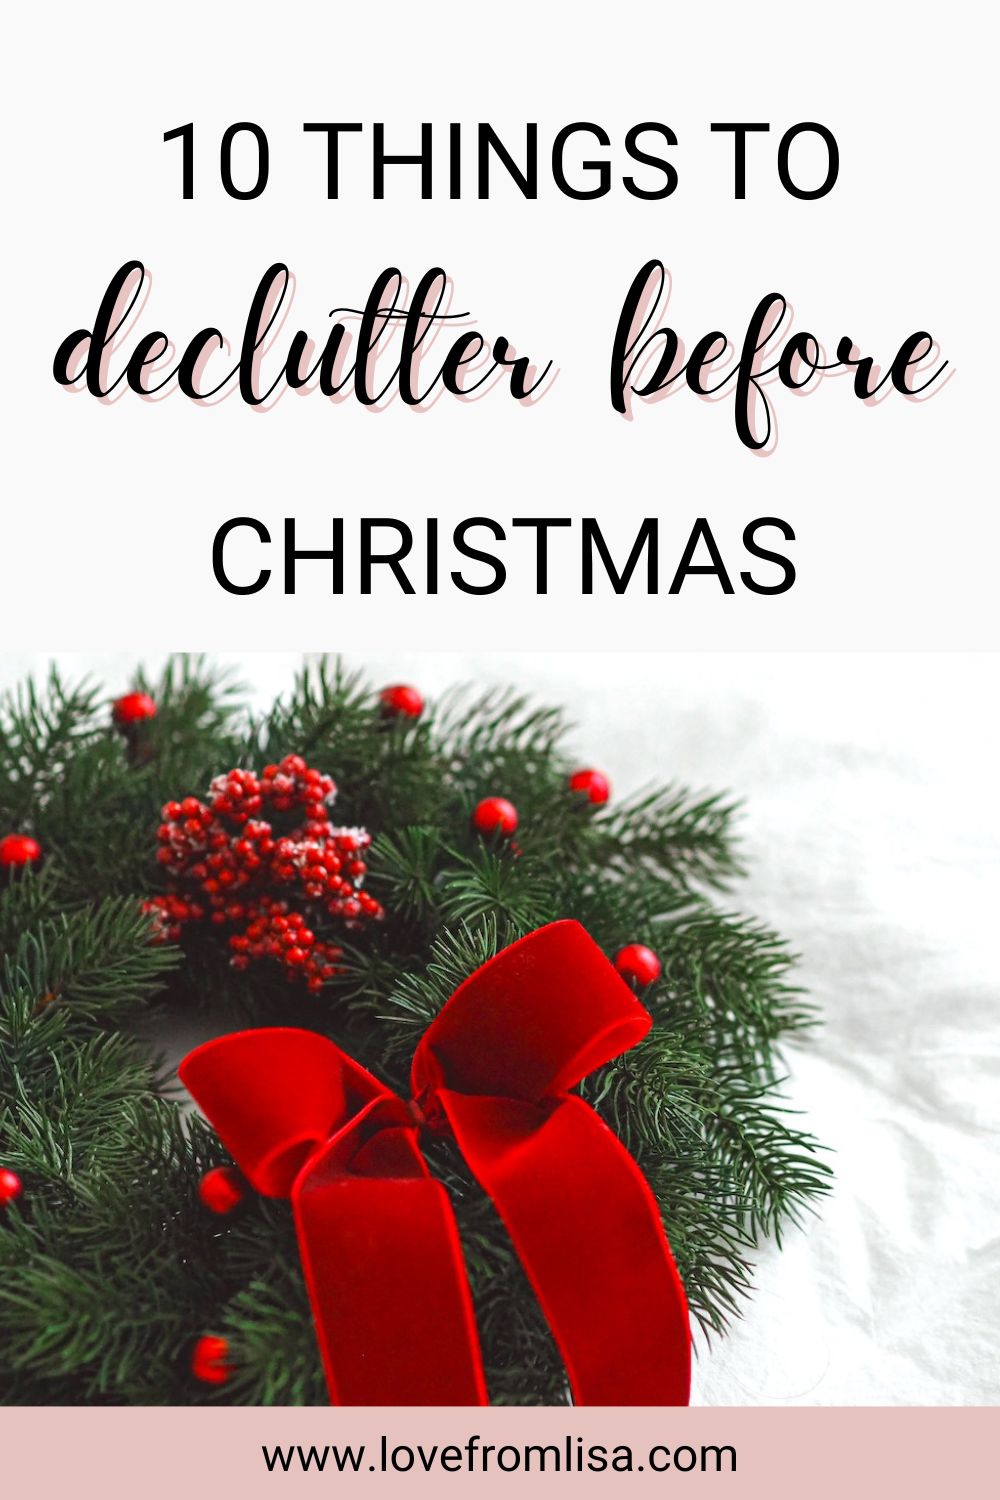 10 things to declutter before Christmas Pinterest